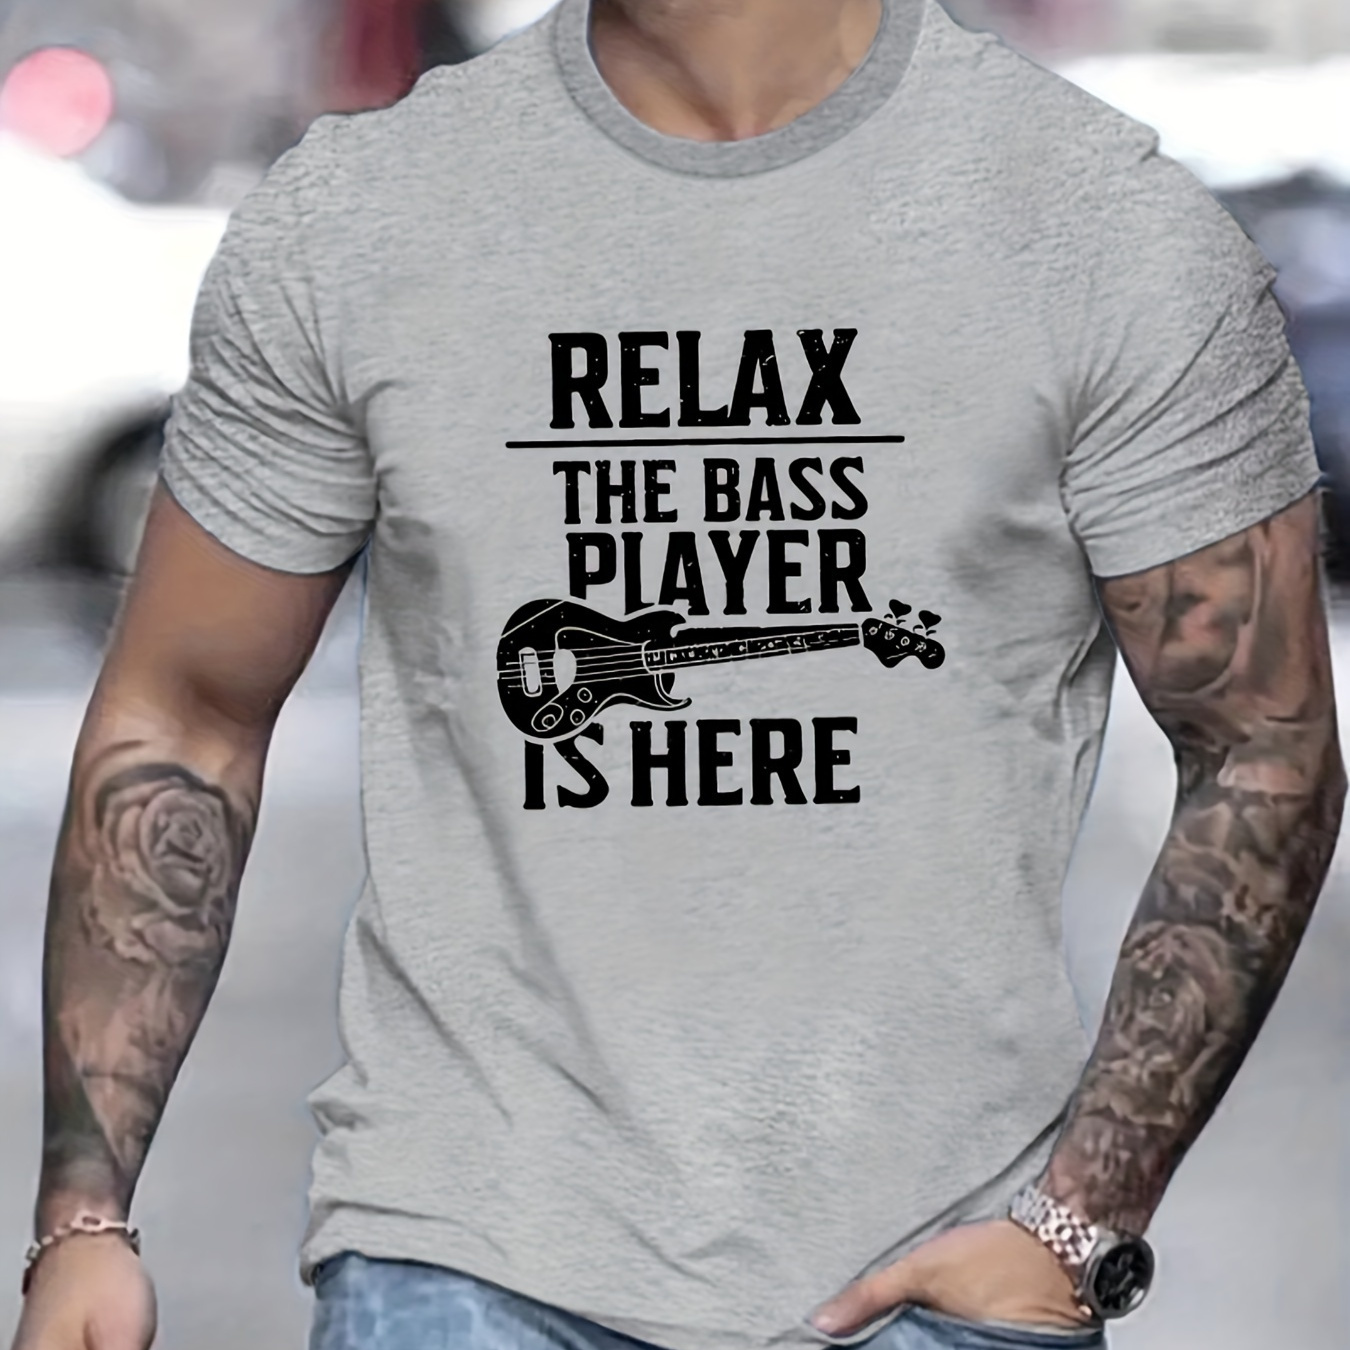 

The Bass Player... Print T Shirt, Tees For Men, Casual Short Sleeve T-shirt For Summer